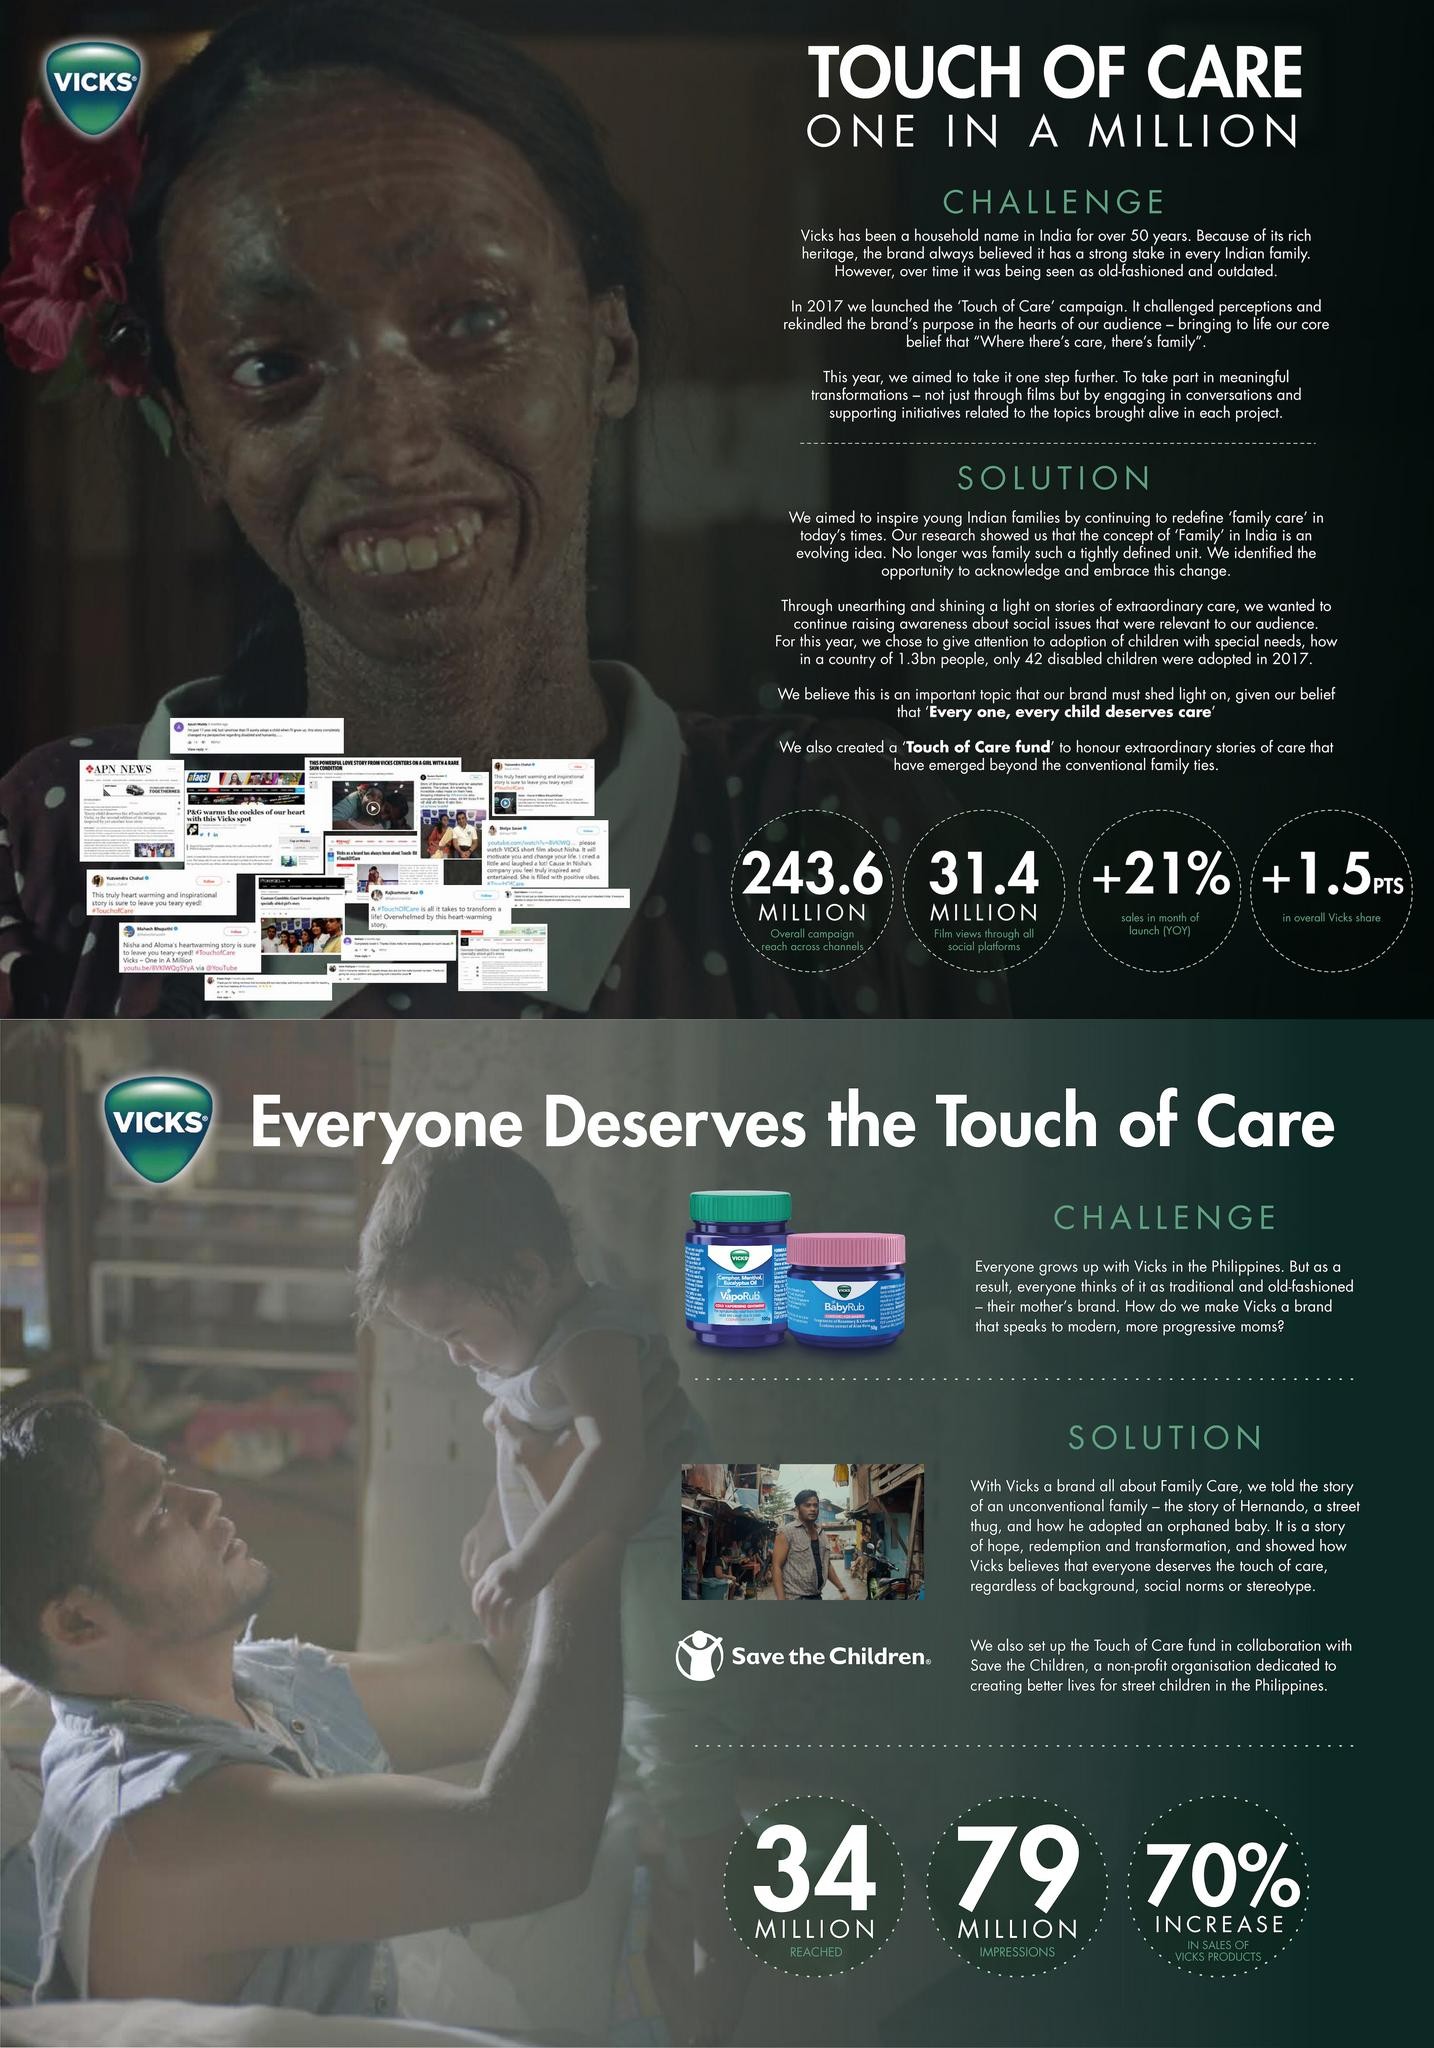 Vicks: Touch of Care